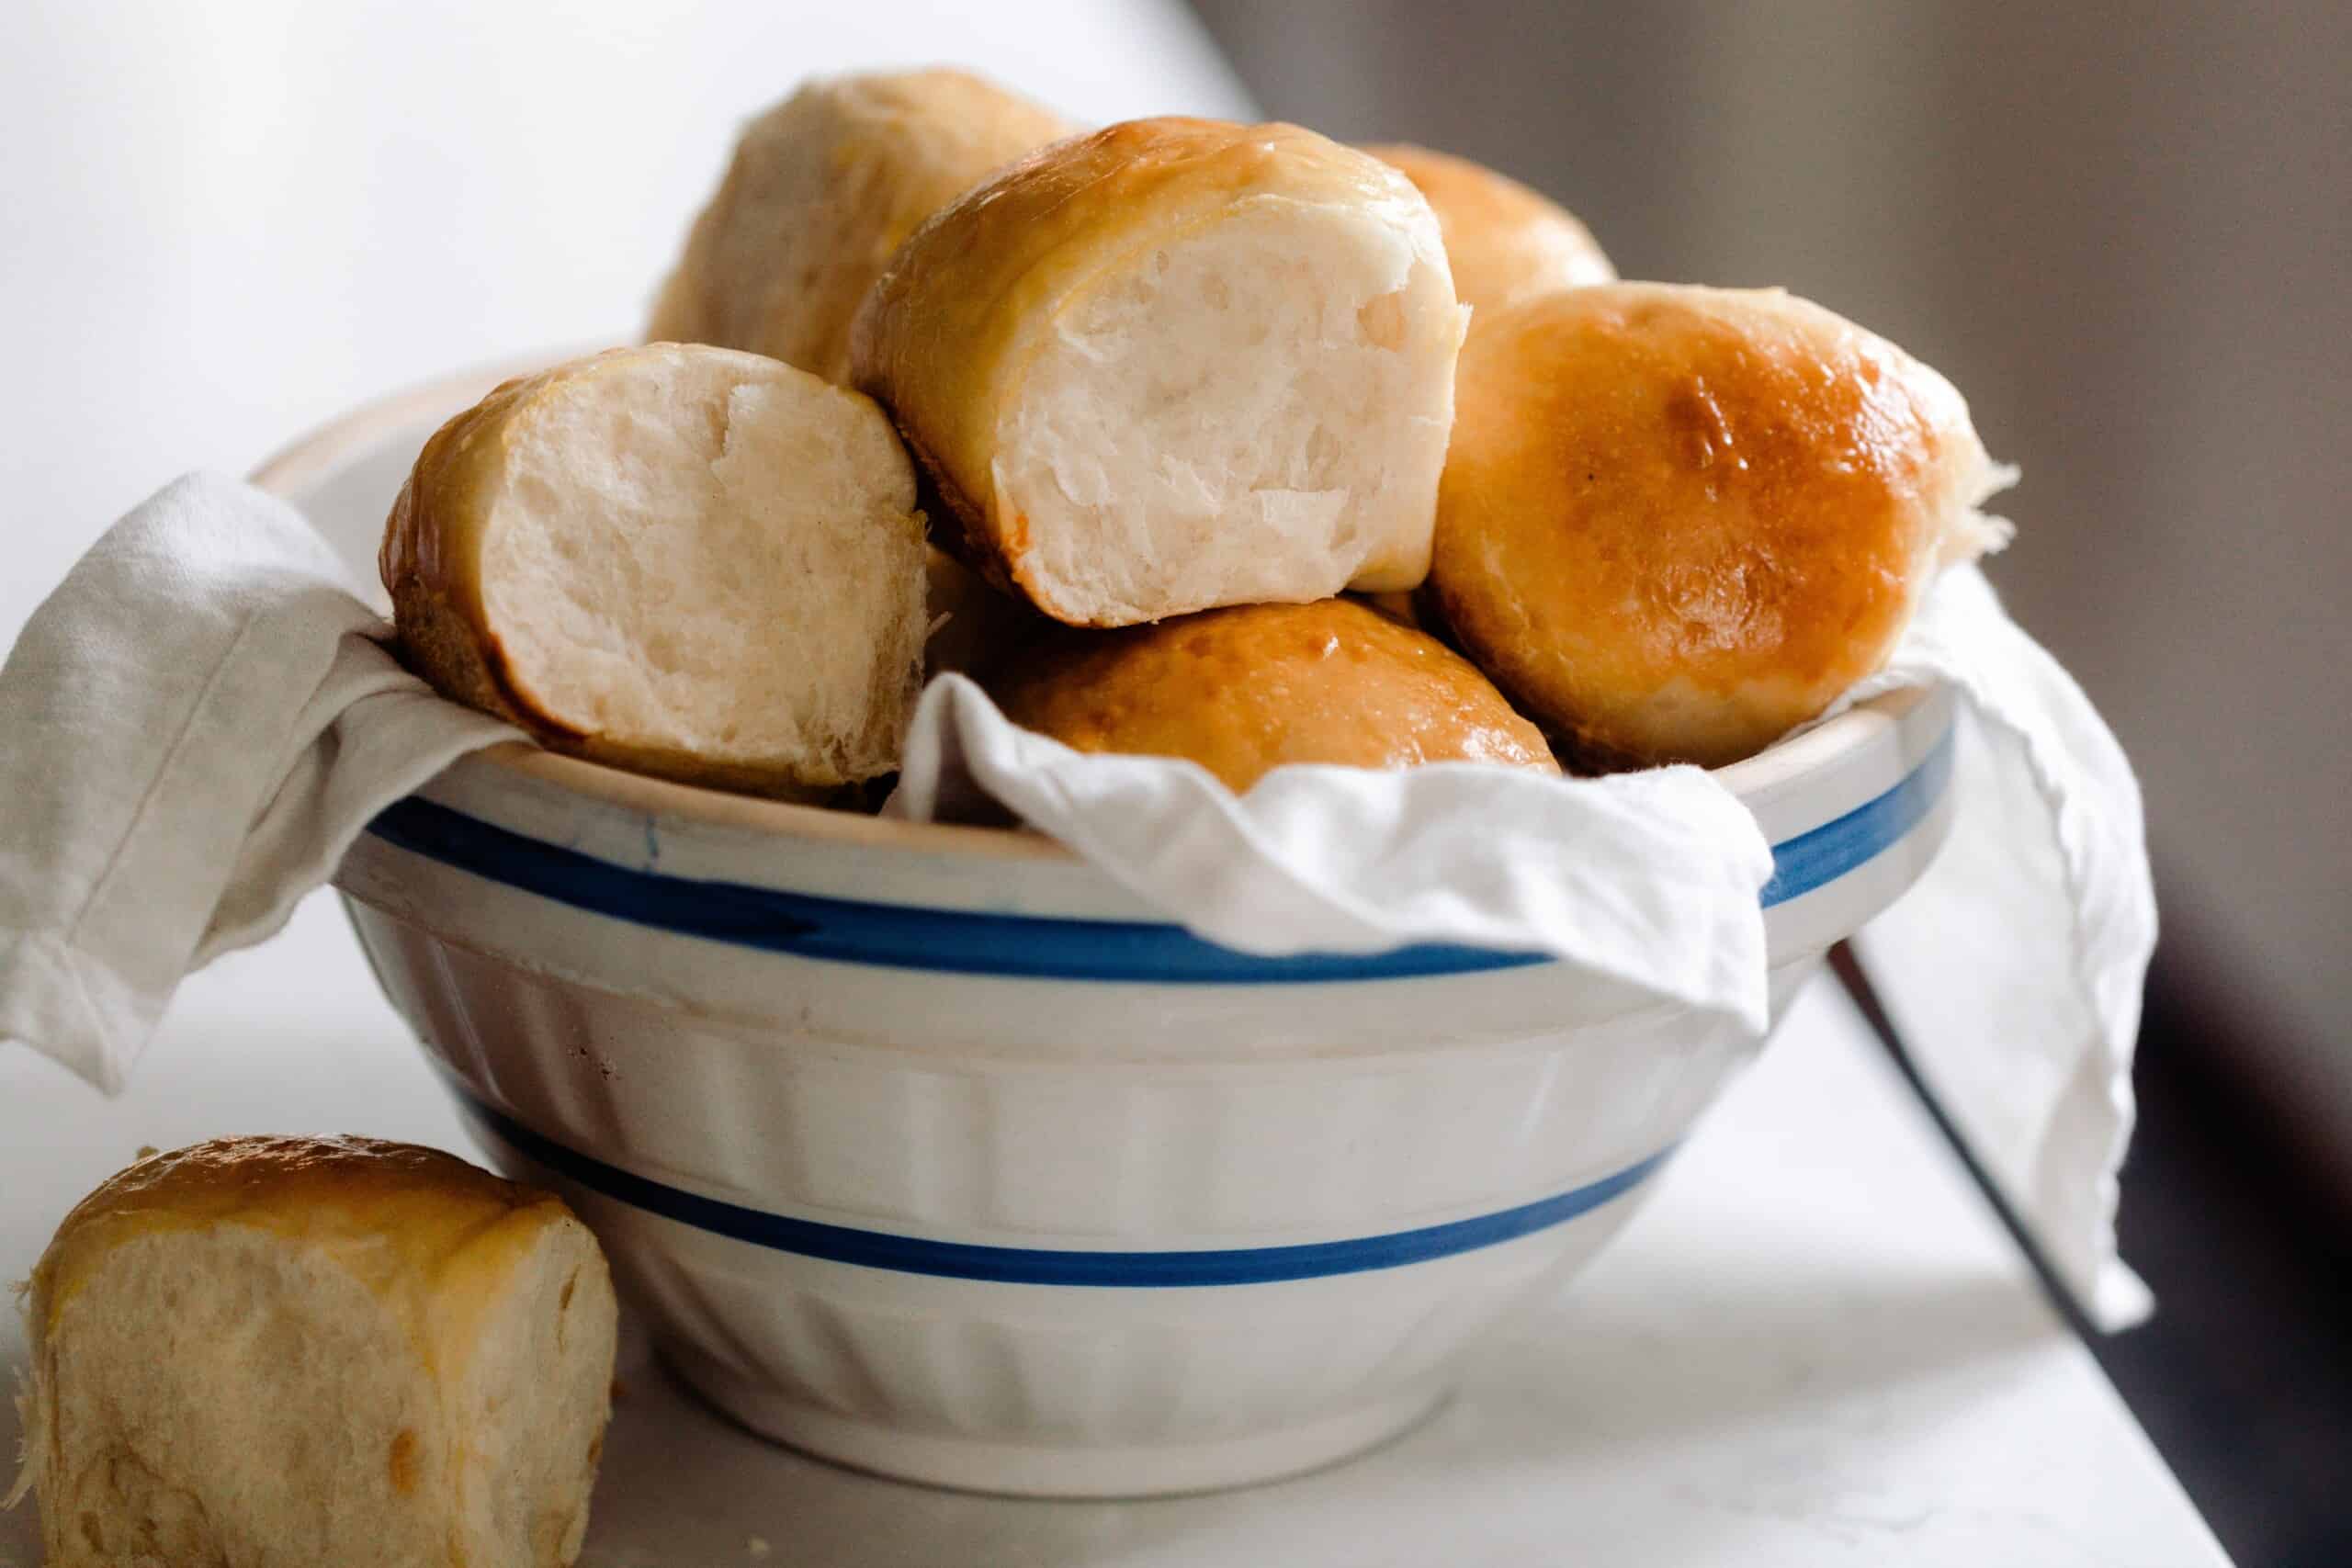 sourdough Hawaiian sweet rolls stacked in a white and cream ironstone bowl lined with a white linen towel. The bowl is on a white countertop